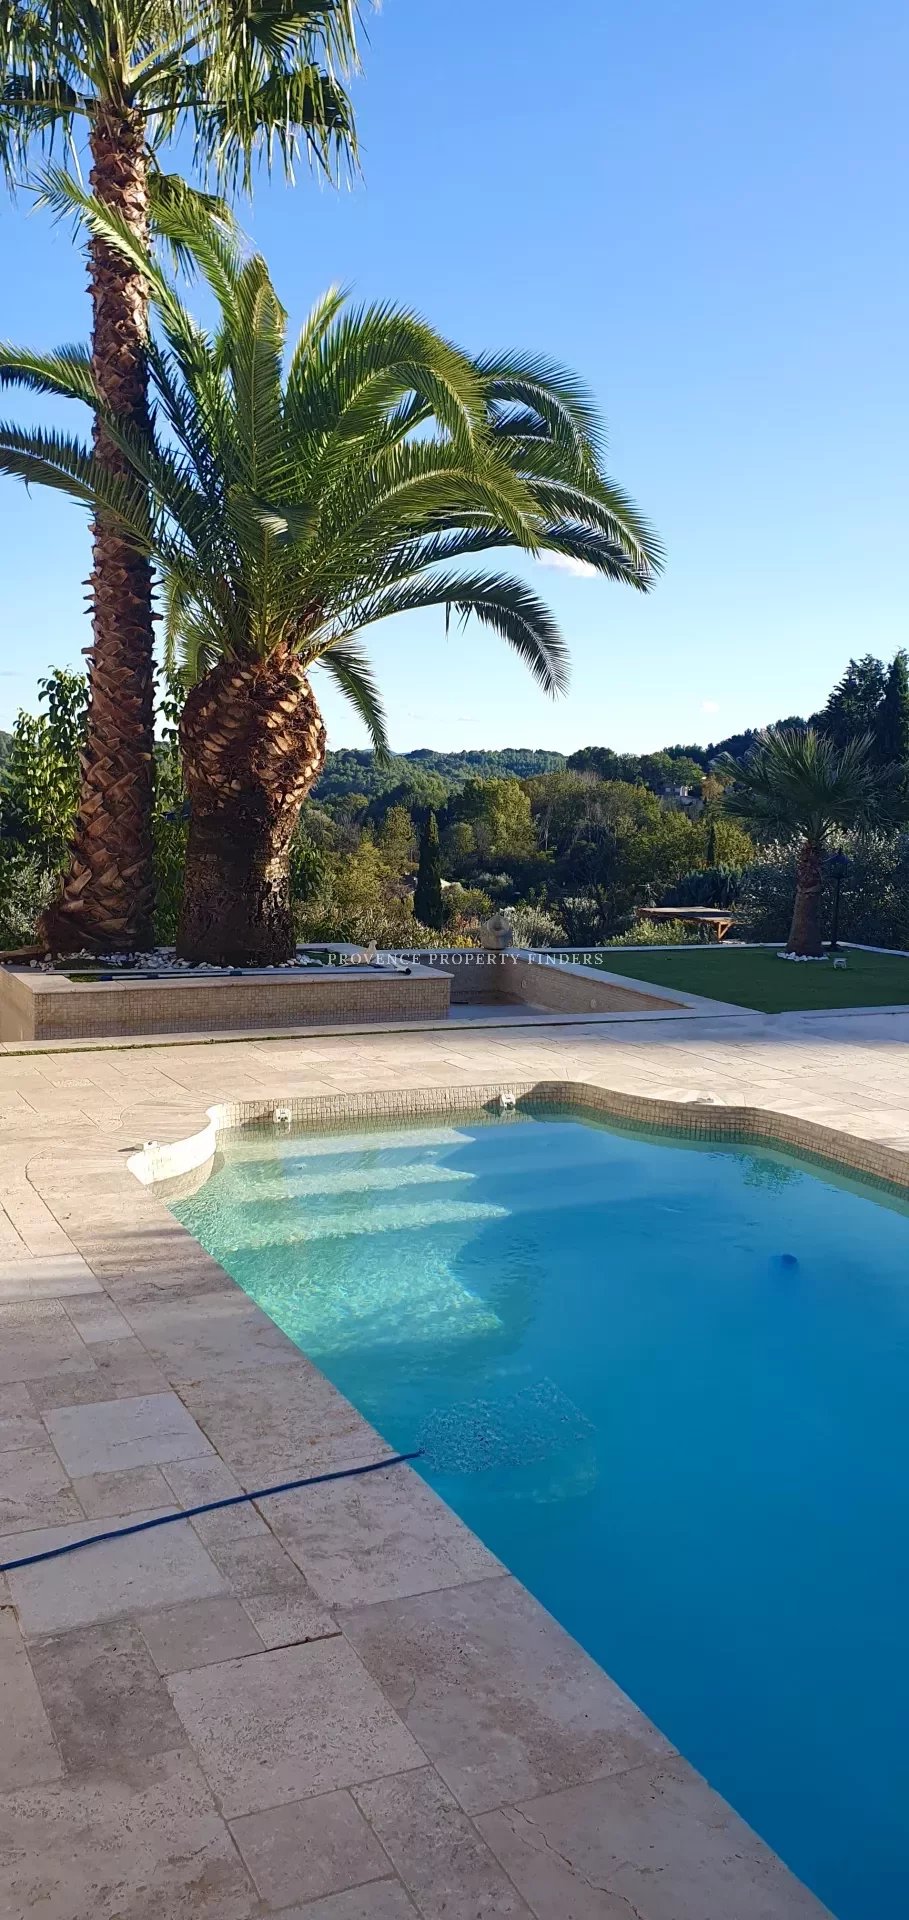 Provence, Villa with a view of Flayosc